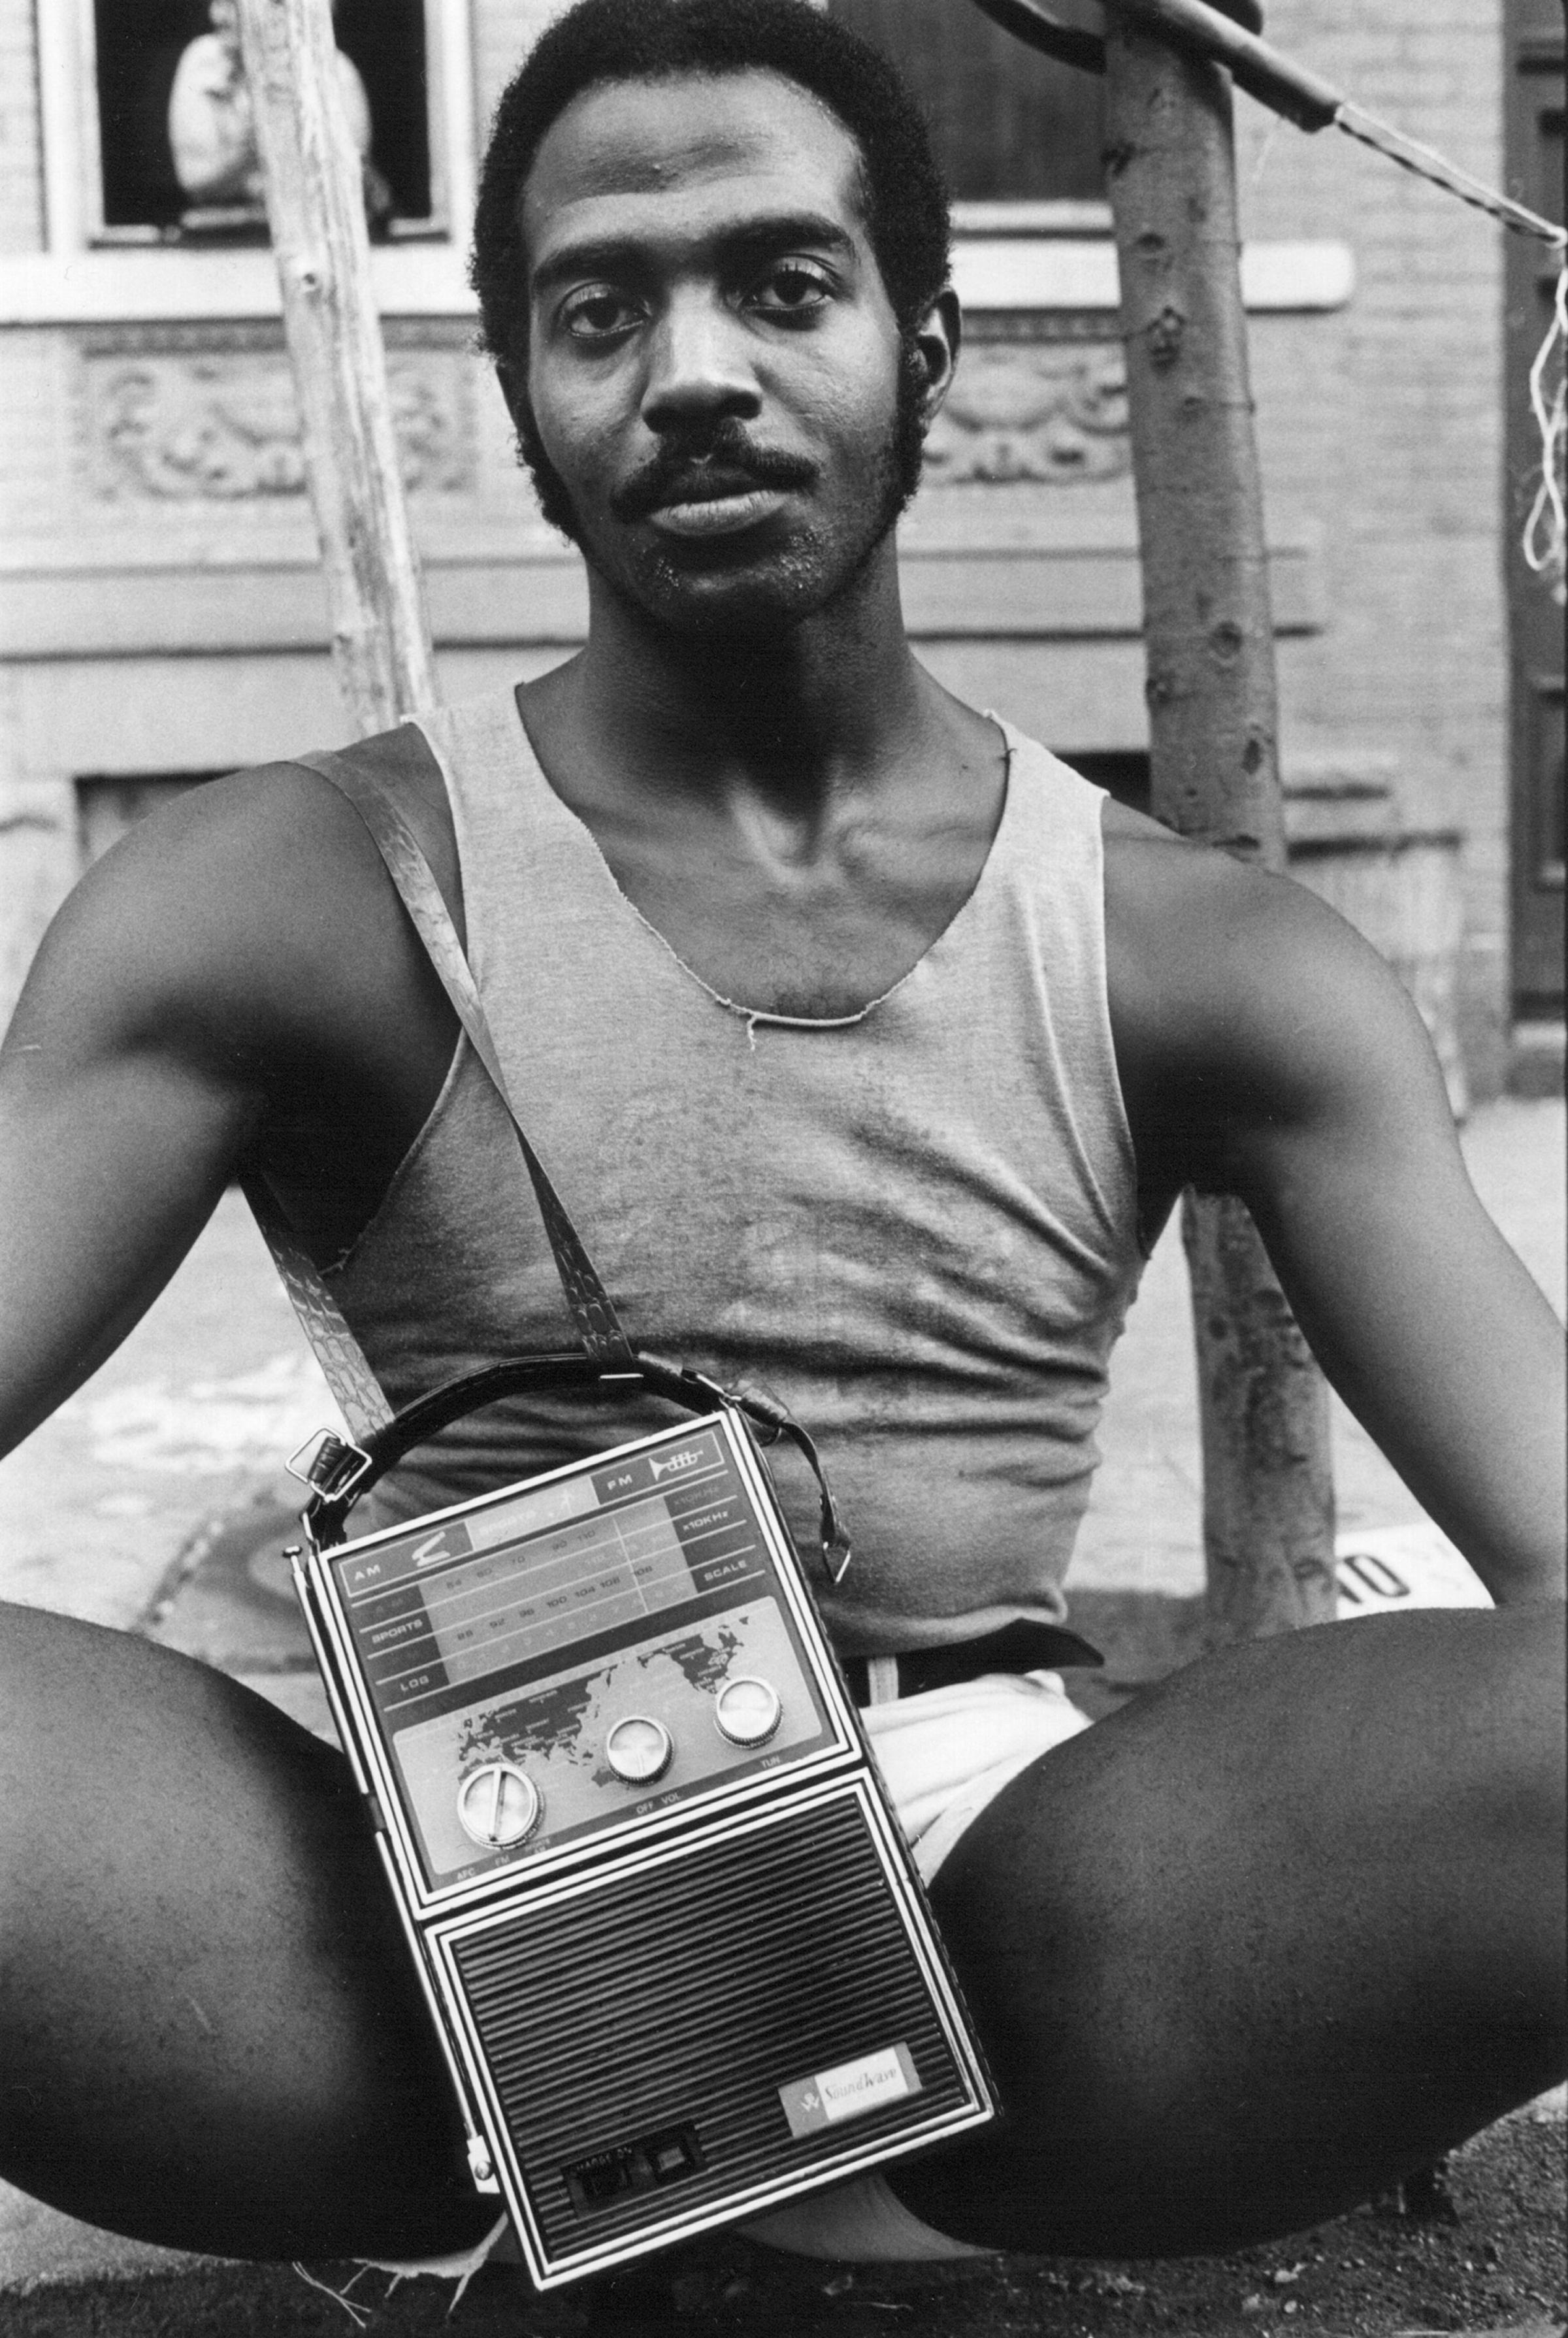 Guy with Radio, East 7th Street, 1977